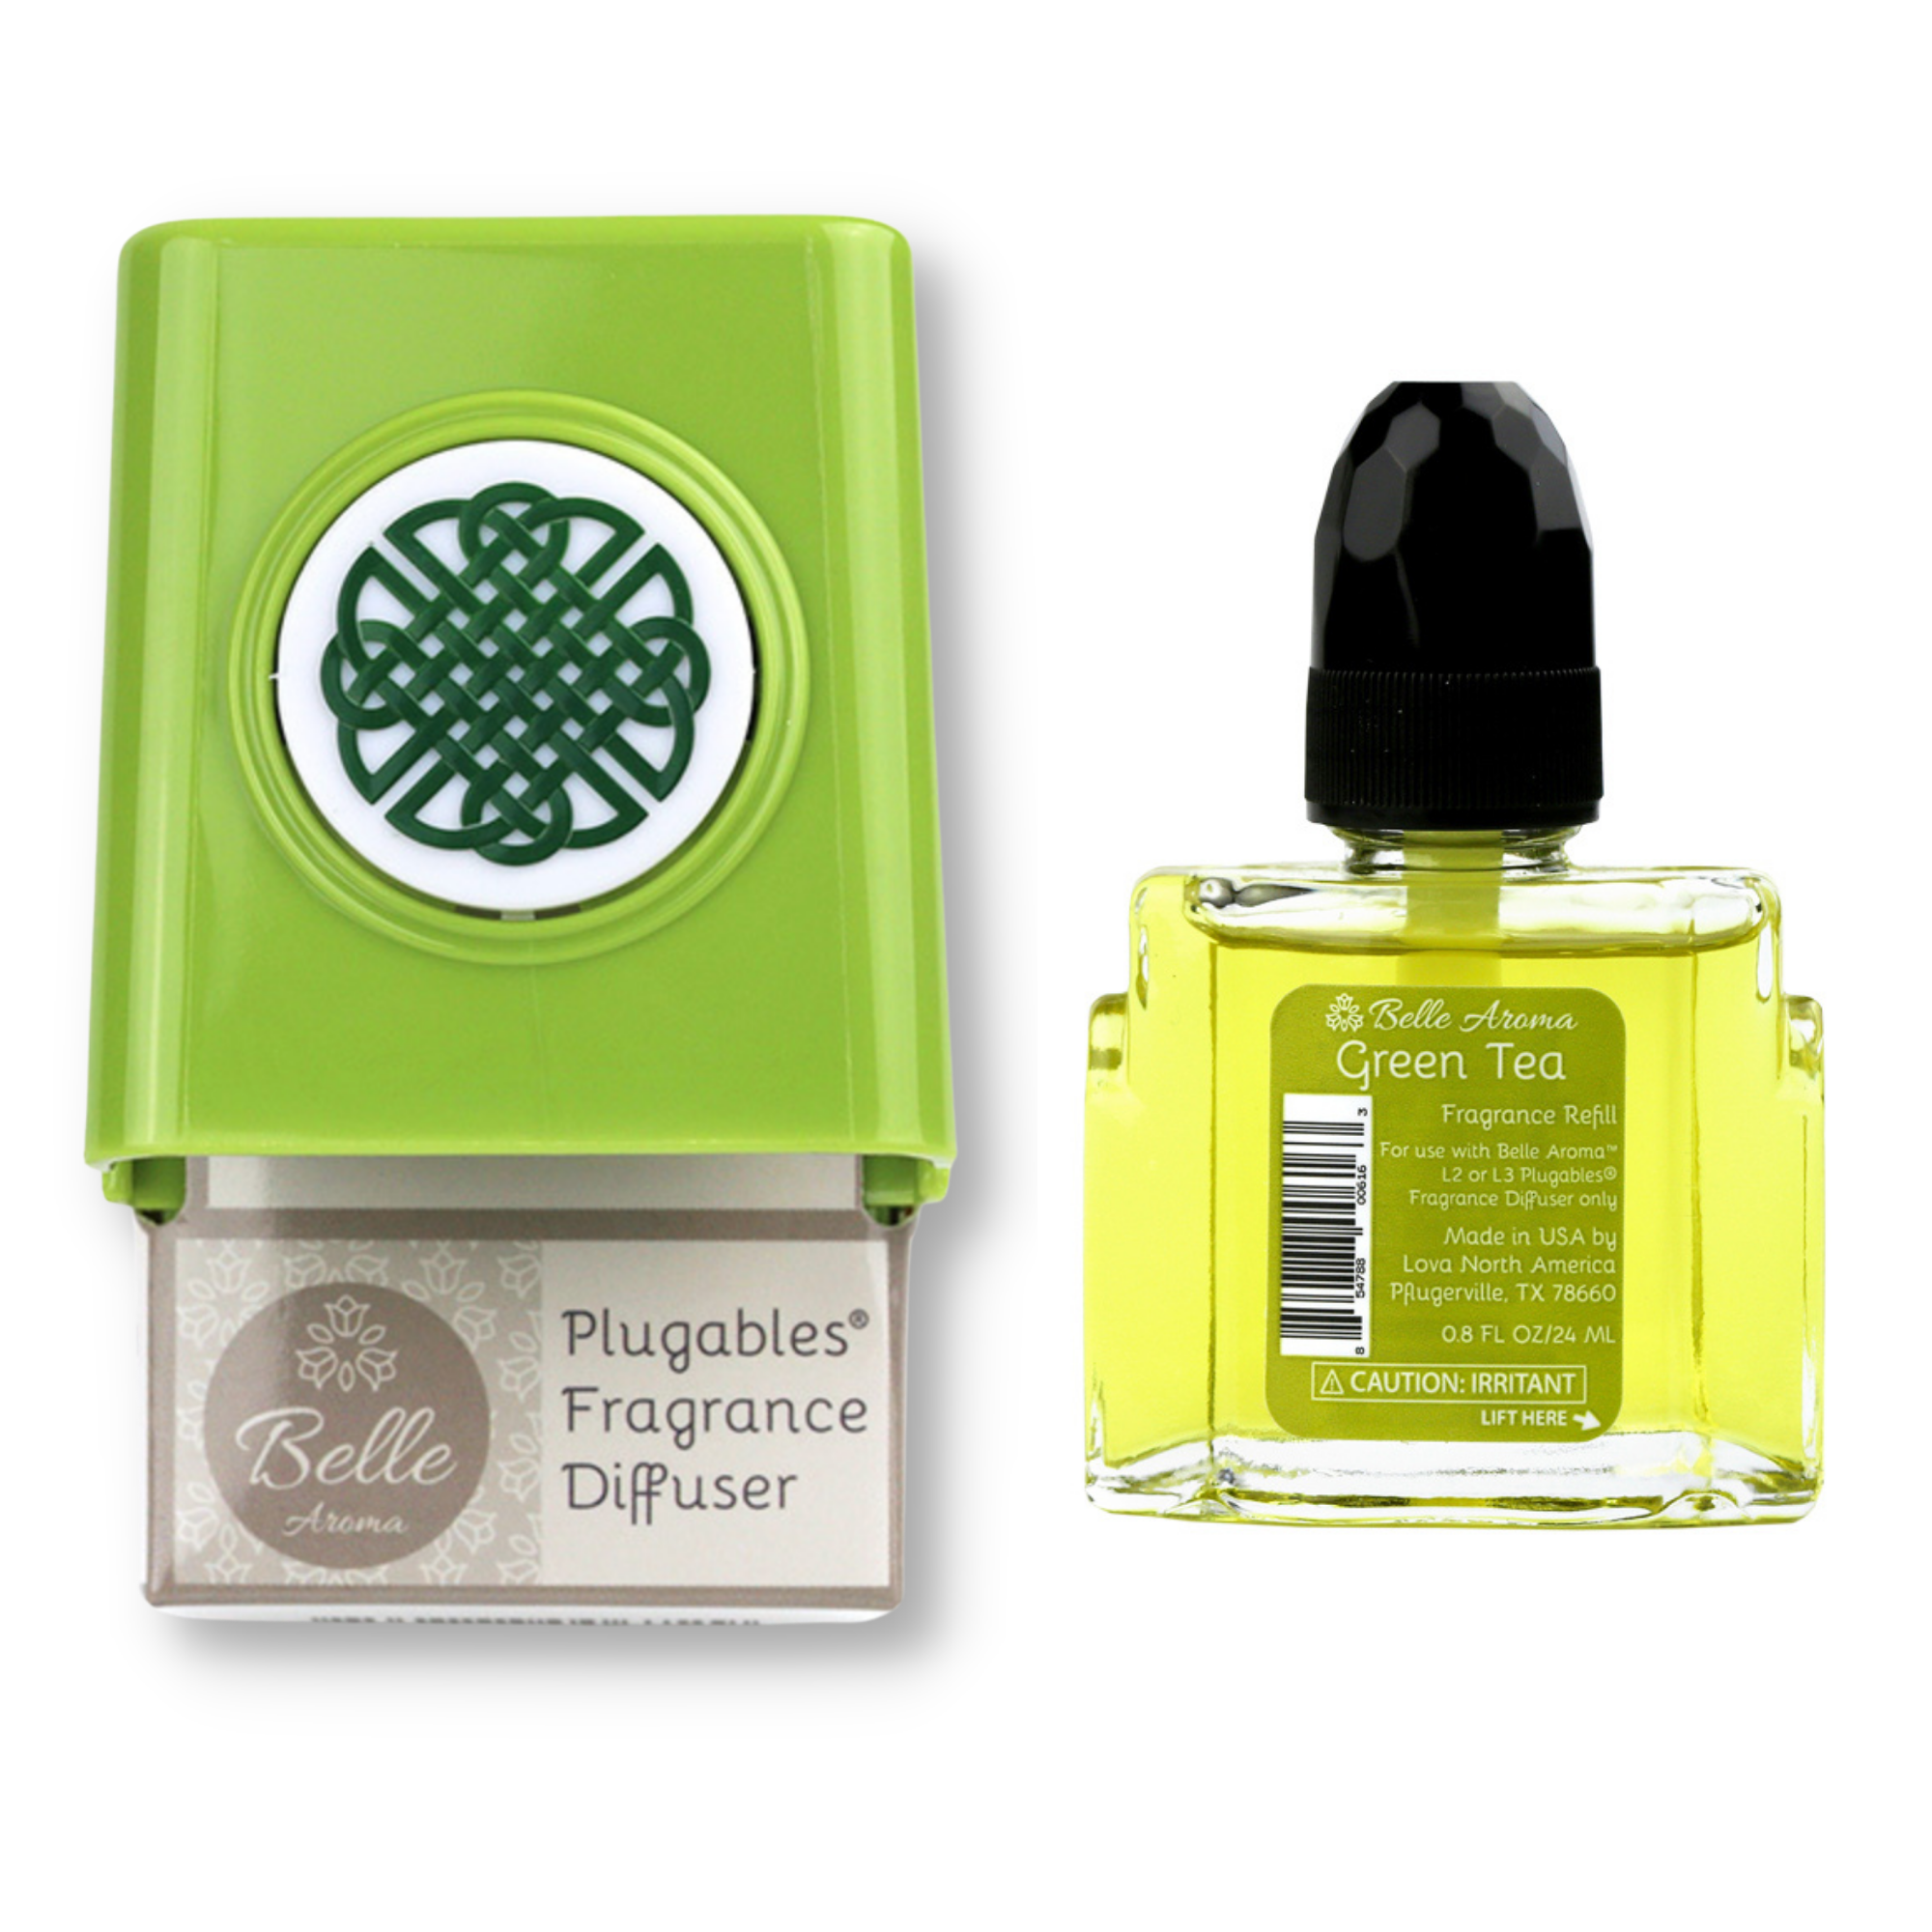 Celtic Knot Medallion Plugables® Plugin Electric Scented Oil Diffuser - Granny Smith with Green Tea Fragrance Oil Home Fragrance Accessories